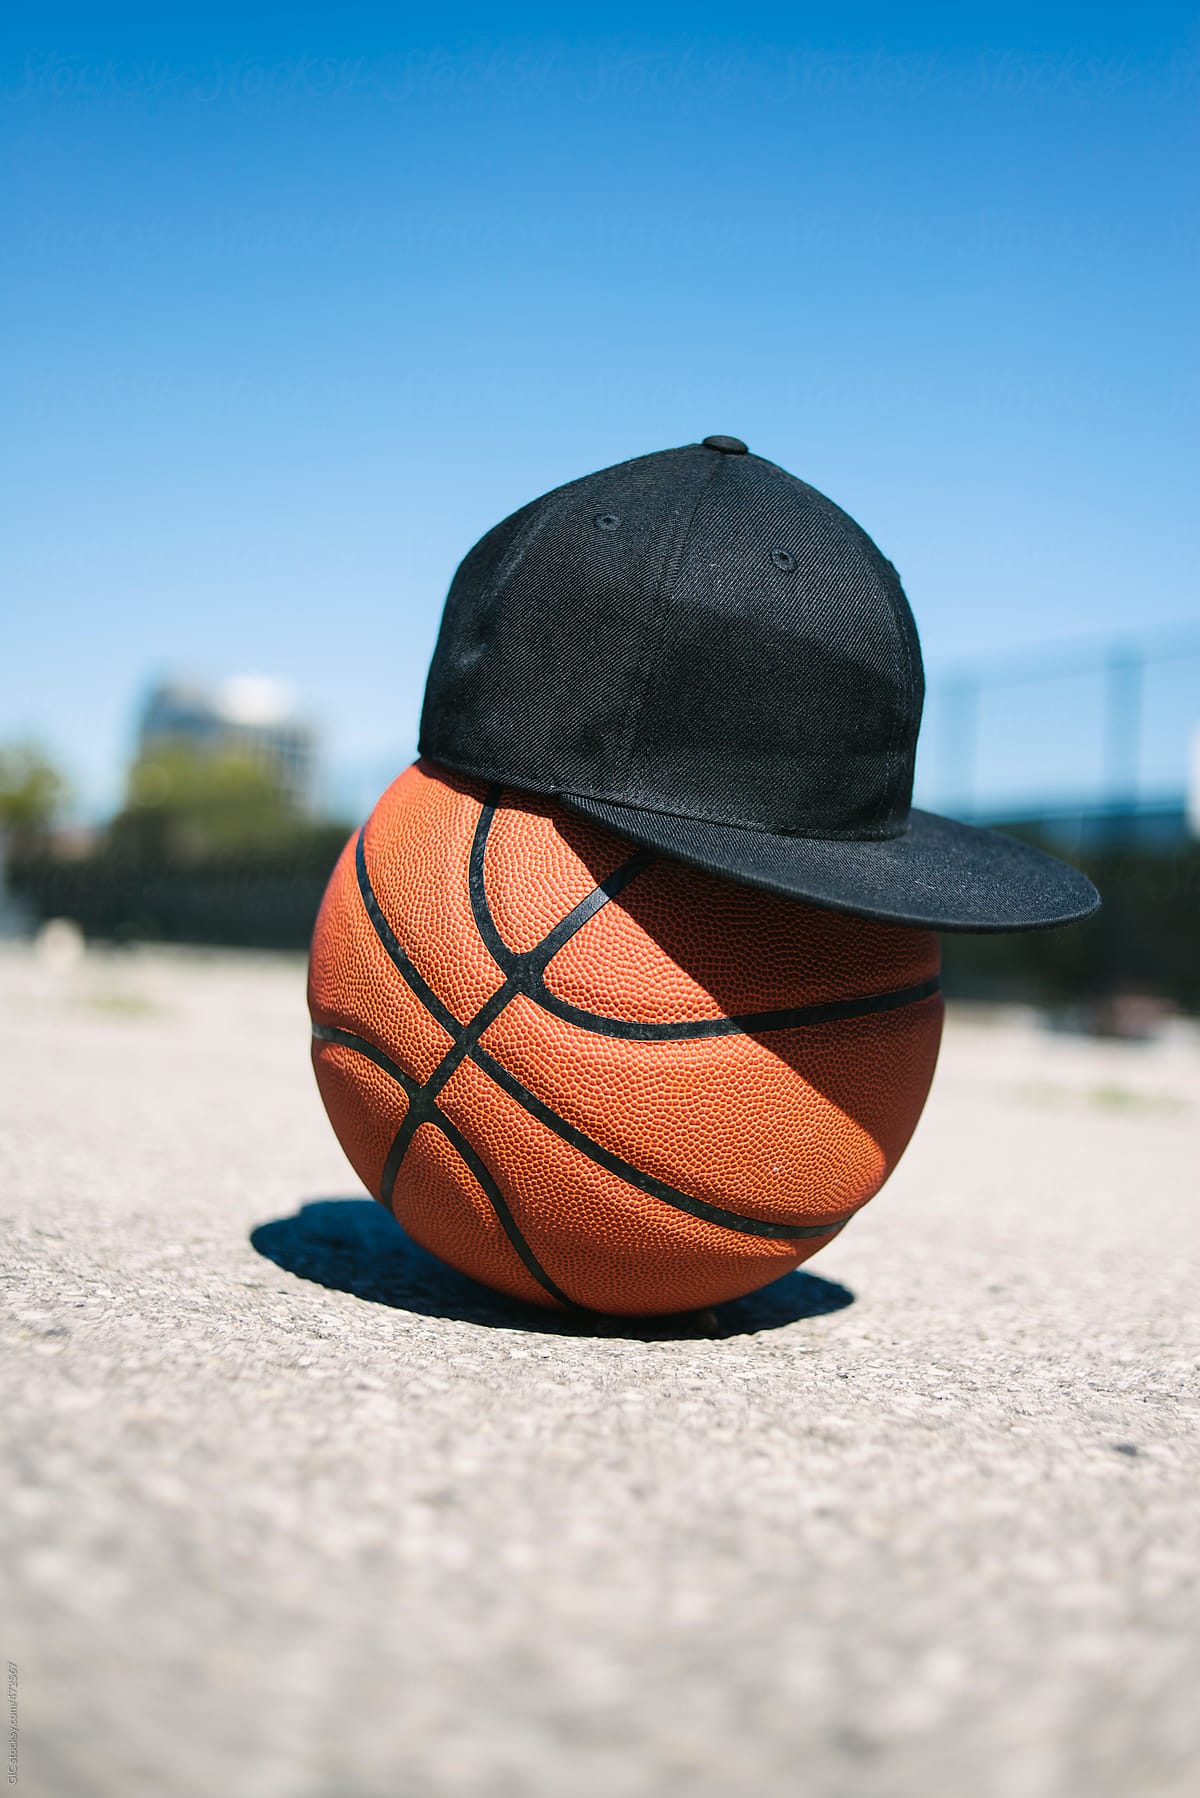 Basket ball with a cap